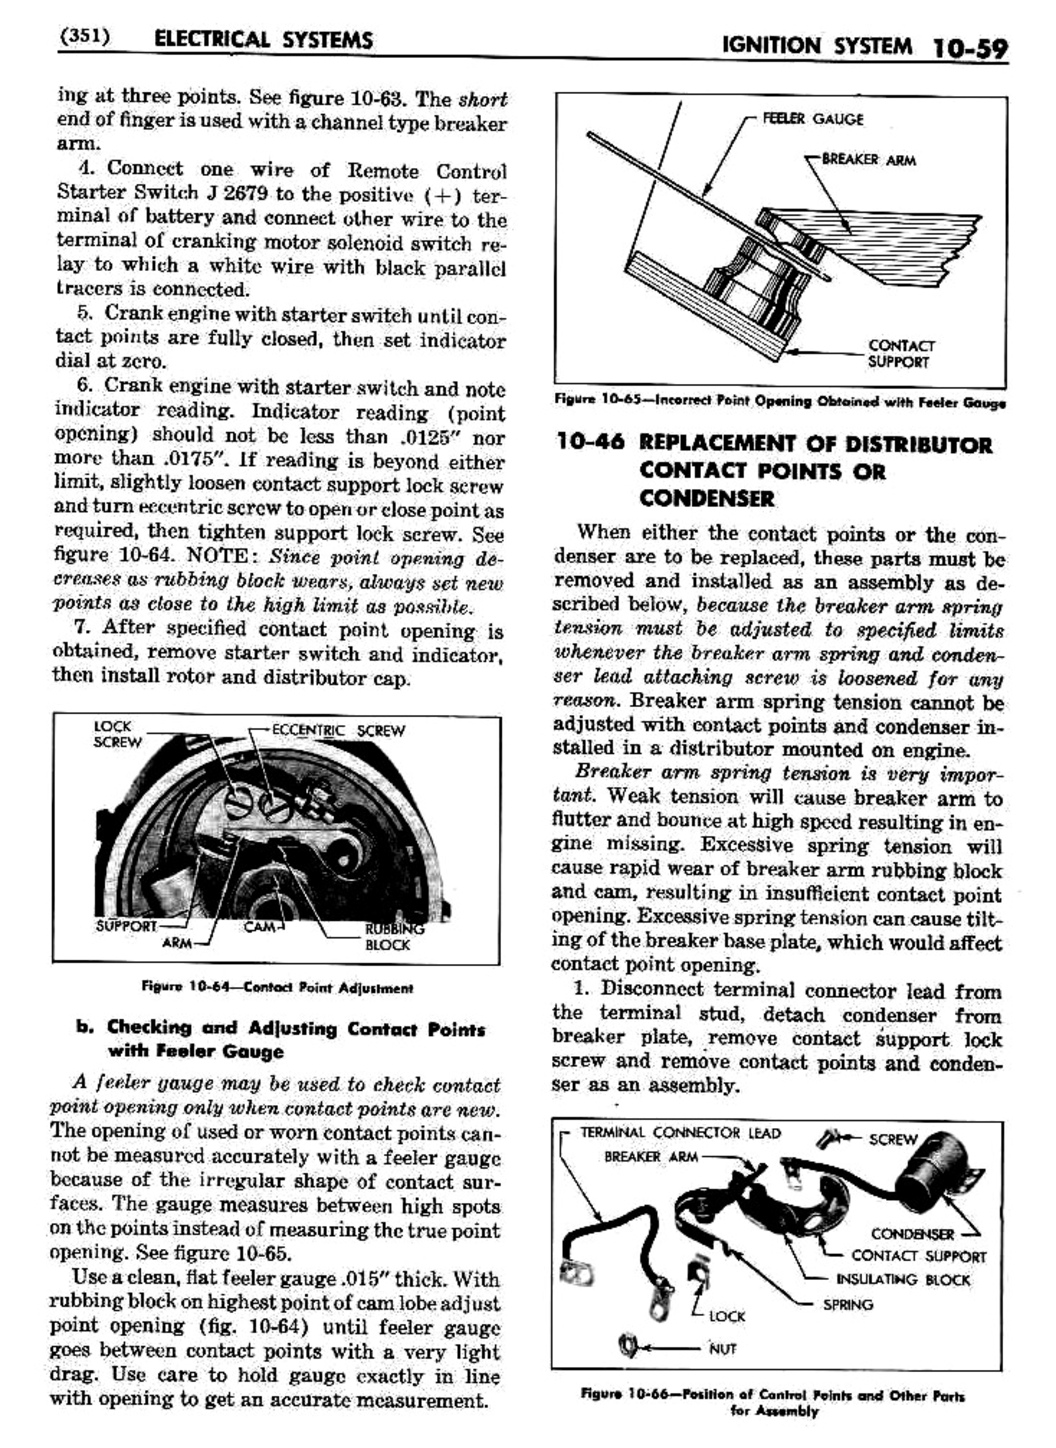 n_11 1951 Buick Shop Manual - Electrical Systems-059-059.jpg